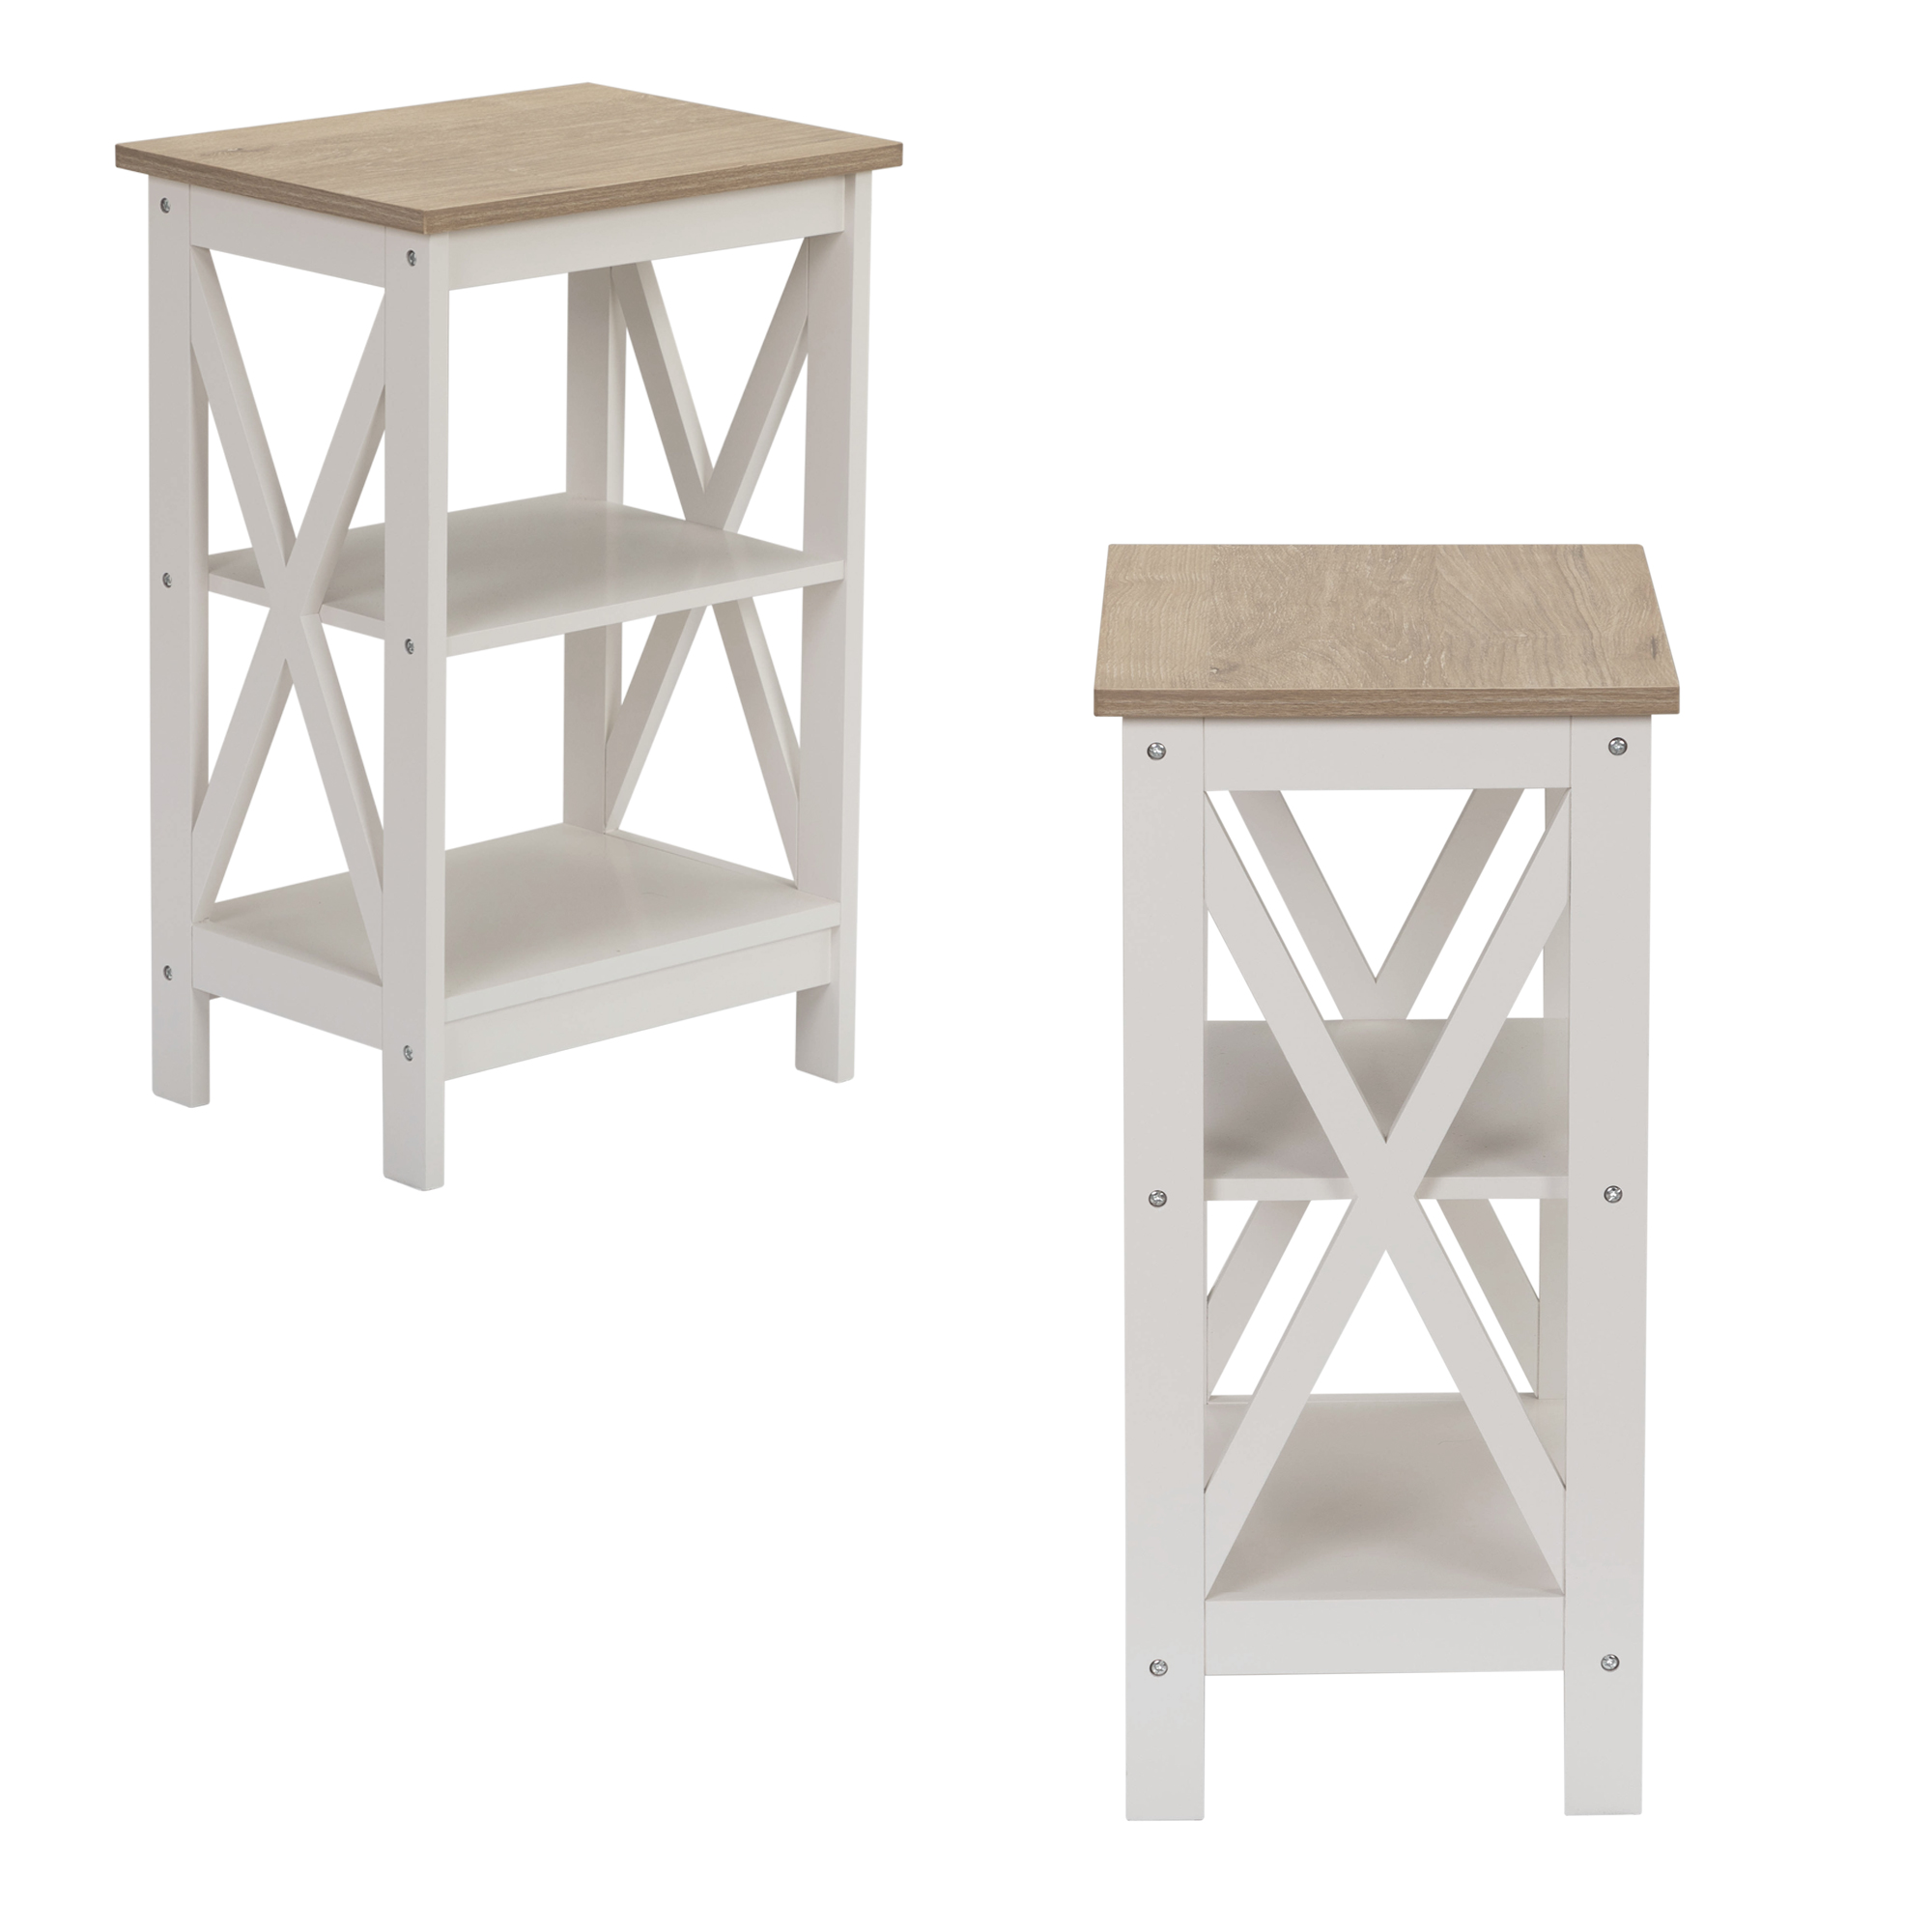 Set of 2 End Table, 3-Tier Wood Nightstand Side Table with X-Design Side for Living Room, Bedroom, Ivory White